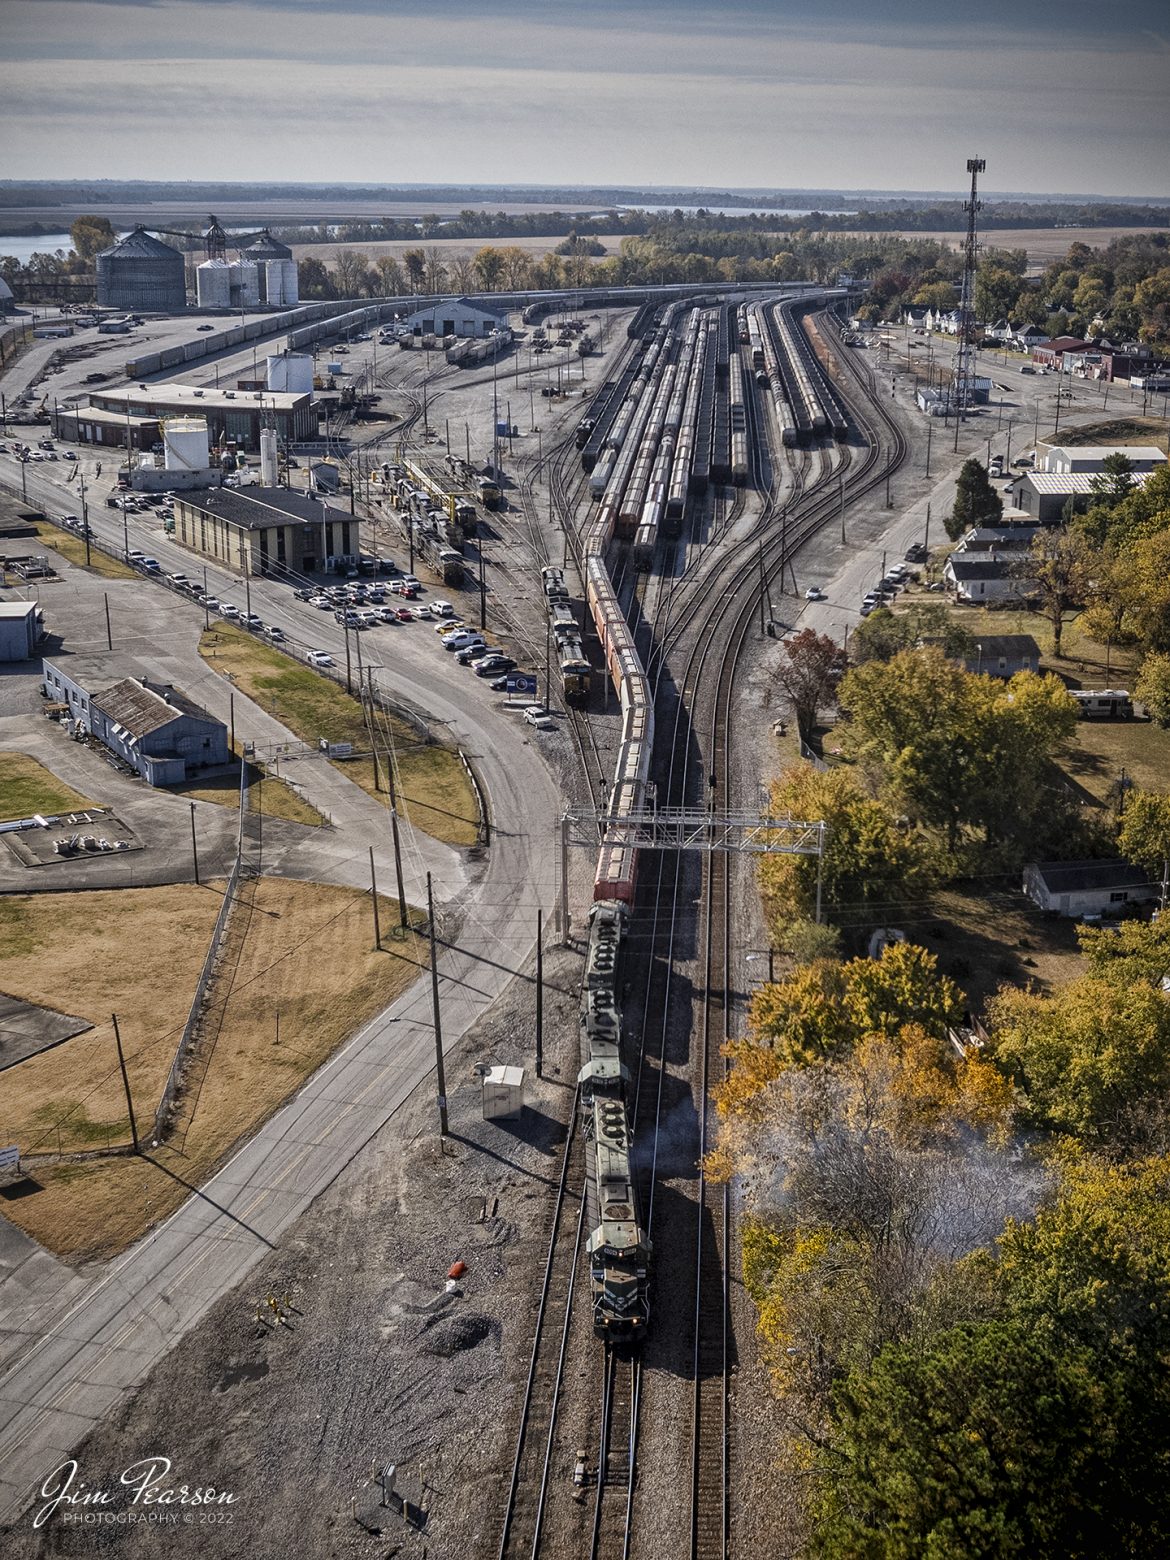 The daily Evansville Western Railway local, with EVWR 6004 (SD60) leading, backs their train into CSX Howell Yard in Evansville, IN, as it arrives to perform its interchange work, in this cropped aerial view from outside the yard area. Pretty much the entire Howell yard facility can be seen from this view looking south.

According to Wikipedia: The Evansville Western Railway (reporting mark EVWR) is a Class III common carrier shortline railroad operating in the southern Illinois and Indiana region. It is one of three regional railroad subsidiaries owned and operated by P&L Transportation.

Tech Info: DJI Mavic Air 2S Drone, 22mm, f/2.8, 1/3000, ISO 120.

#trainphotography #railroadphotography #trains #railways #dronephotography #trainphotographer #railroadphotographer #jimpearsonphotography #evansvillewesternrailway #evwr #indianatrains